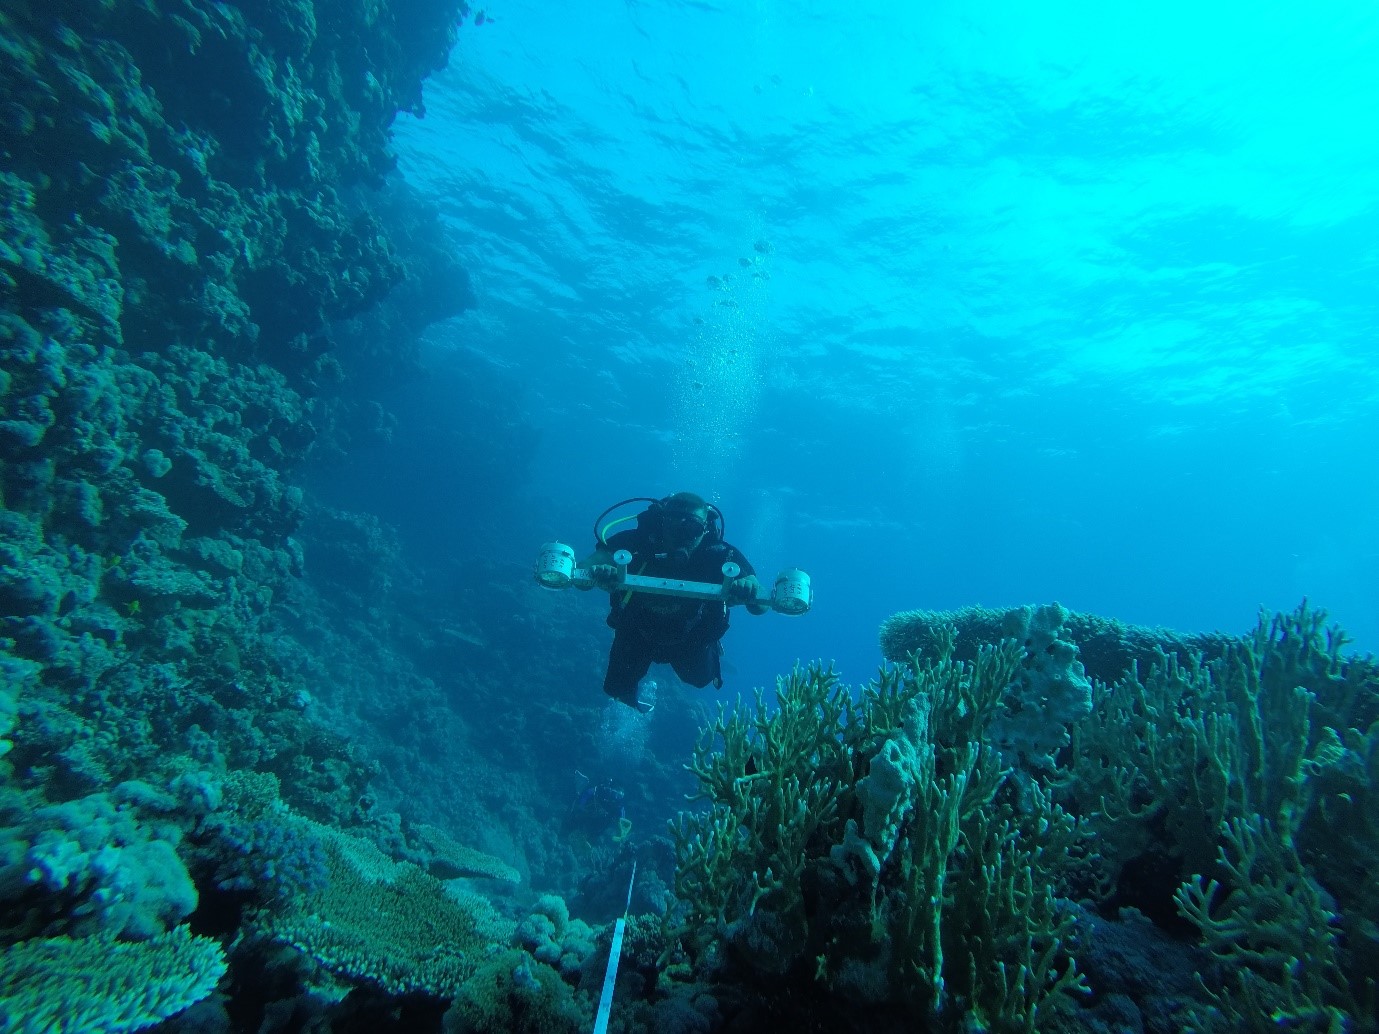 Diver in coral reef ecosystem.